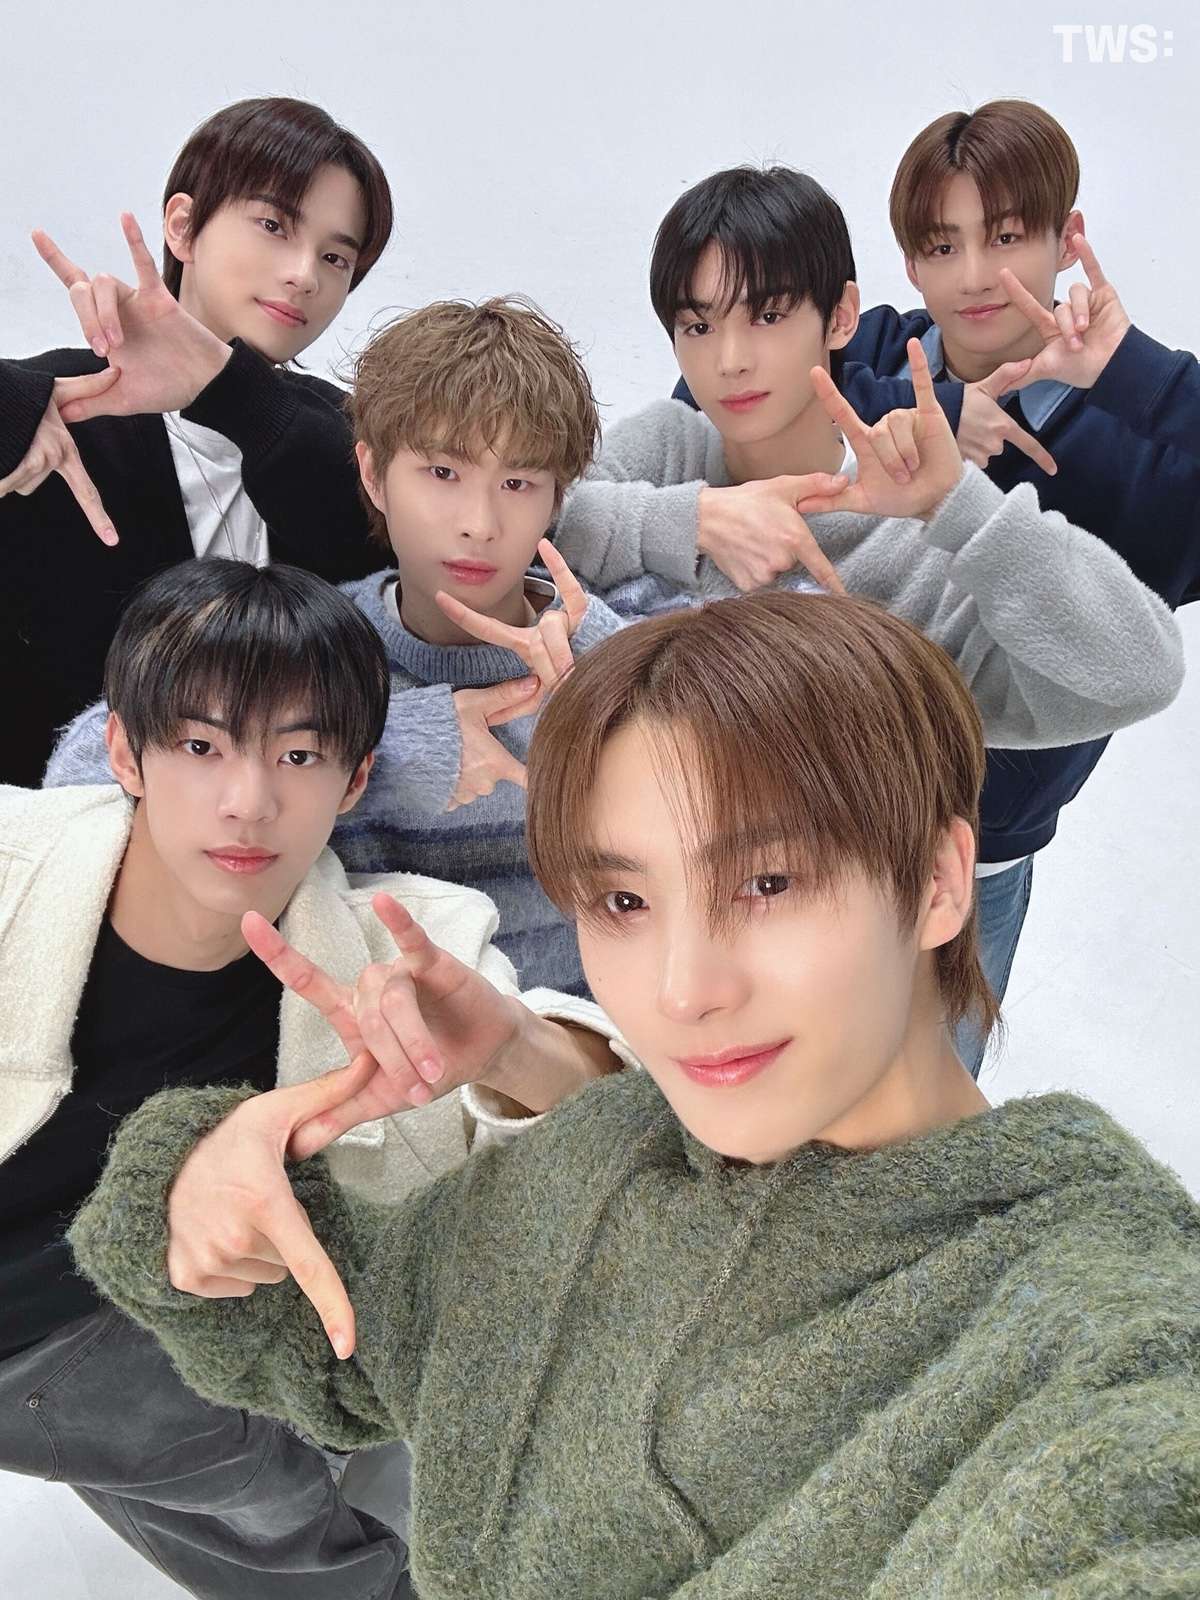 “HYBE’s 5th generation male idols are all the same” Group photos of